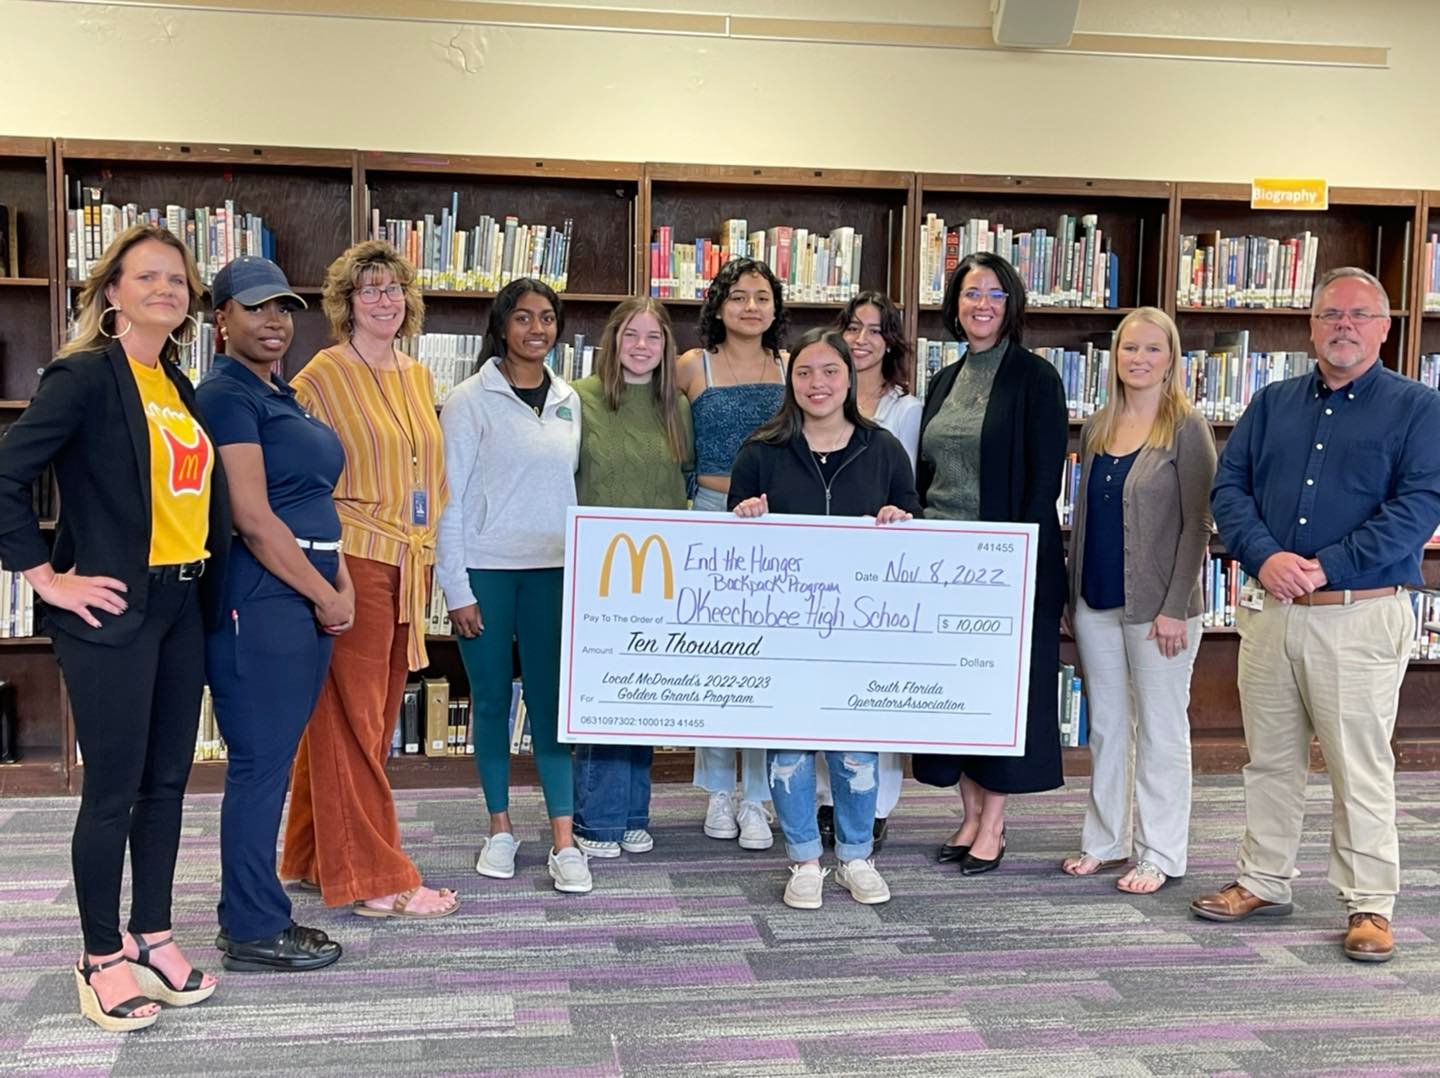 OKEECHOBEE -- Okeechobee High School National Honor Society End the Hunger “Backpack Program” was awarded the McDonald’s Golden Grant Award in the amount of $10,000/ This generous recognition and gift will go a long way to help raise the near $50,000 needed to fund the initiative for one school year. This student led program has now grown to feed 220 Okeechobee County elementary students two meals each weekend. It costs $225 to sponsor a child for the year.  OHS thanks the Nisbet Family and the McDonald’s Corporation for their partnership and support. [Photo courtesy OHS]